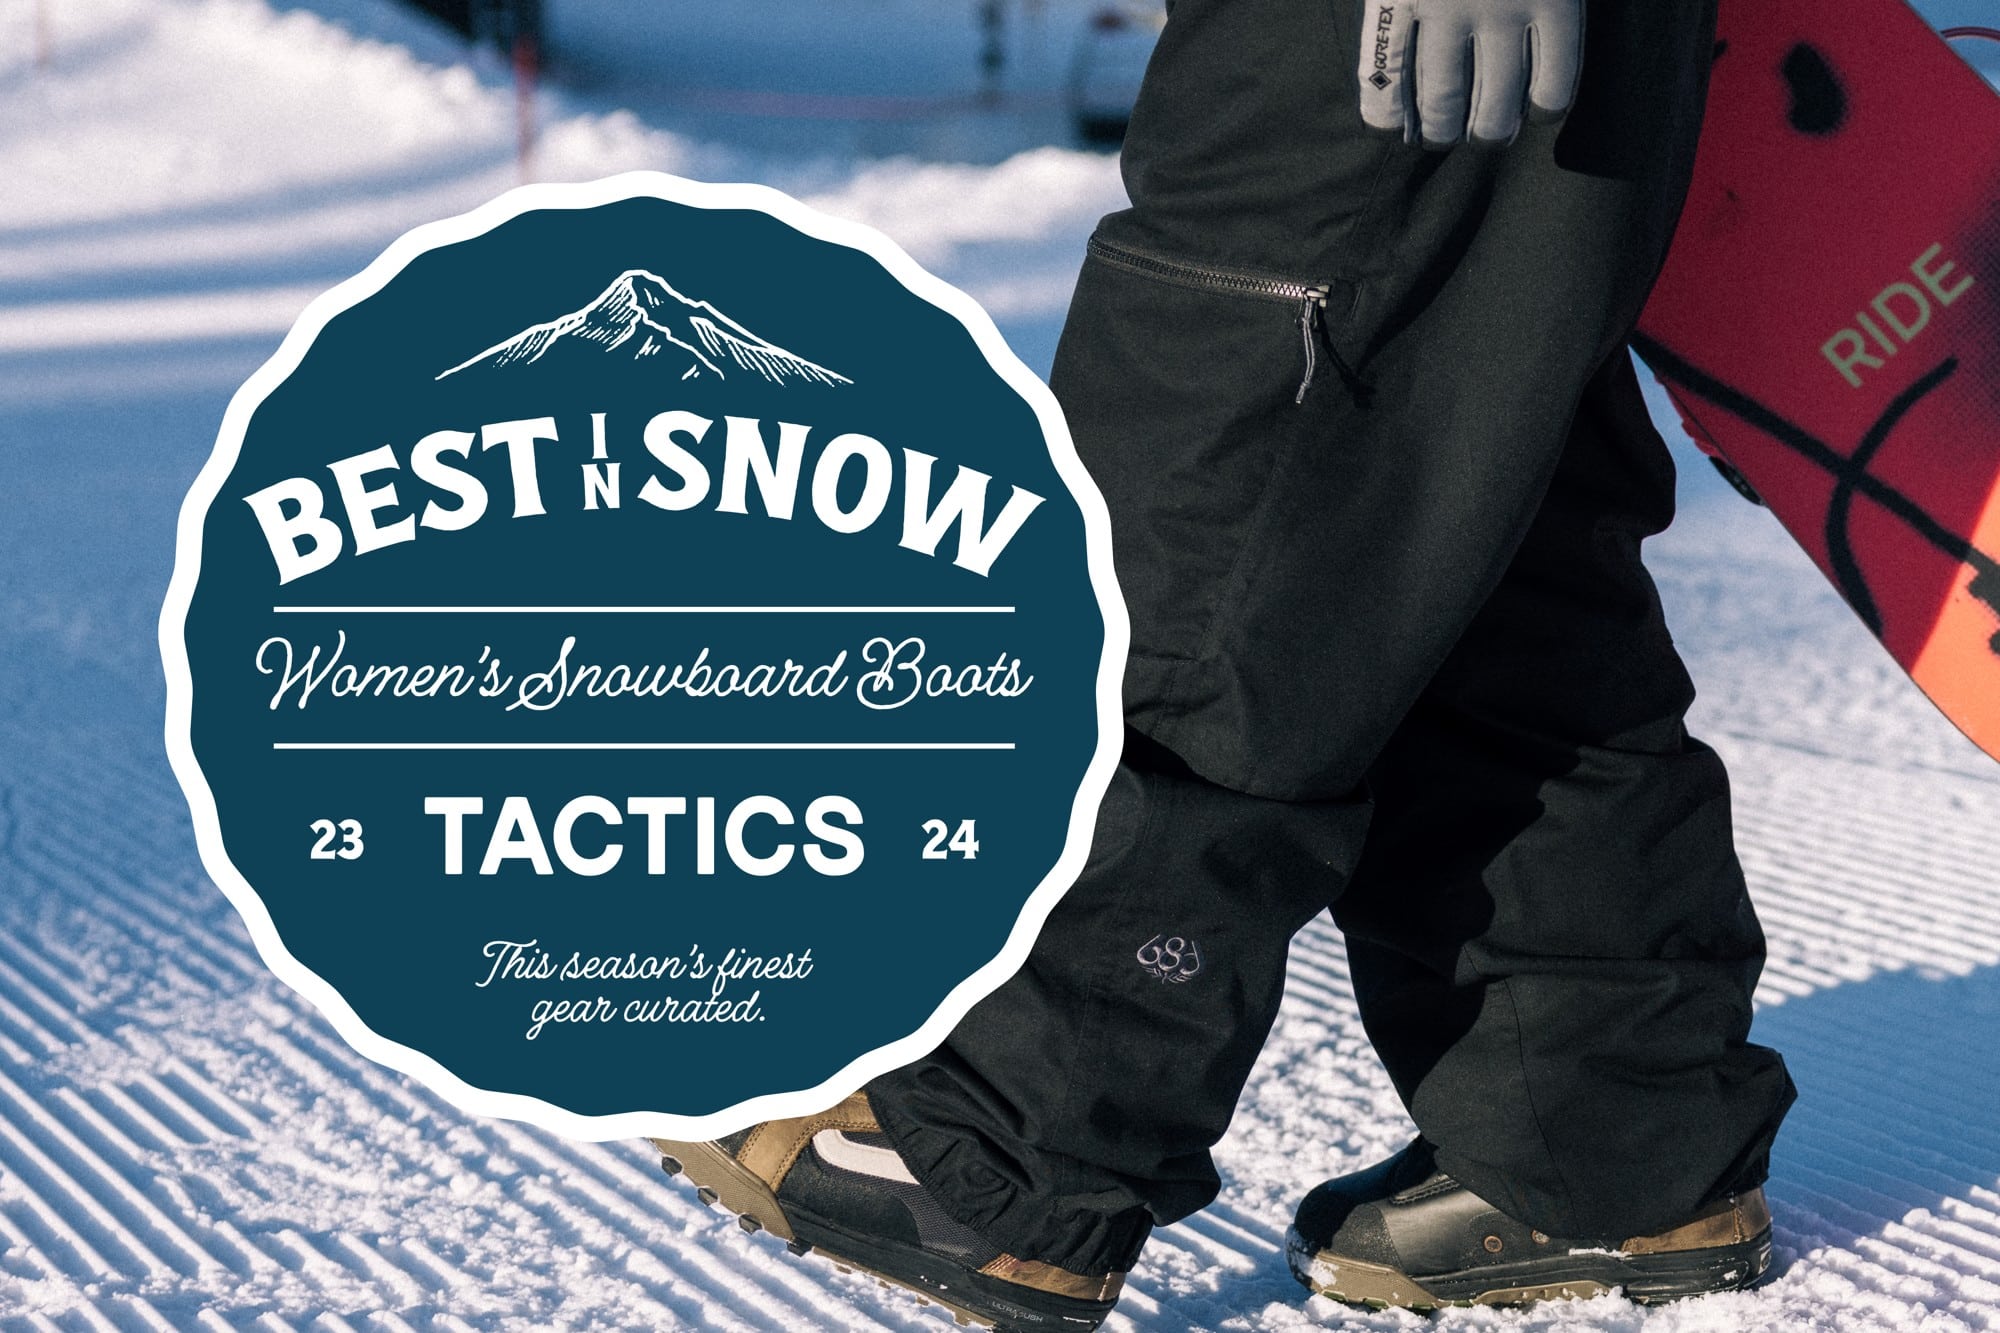 The best snow pants for 2023